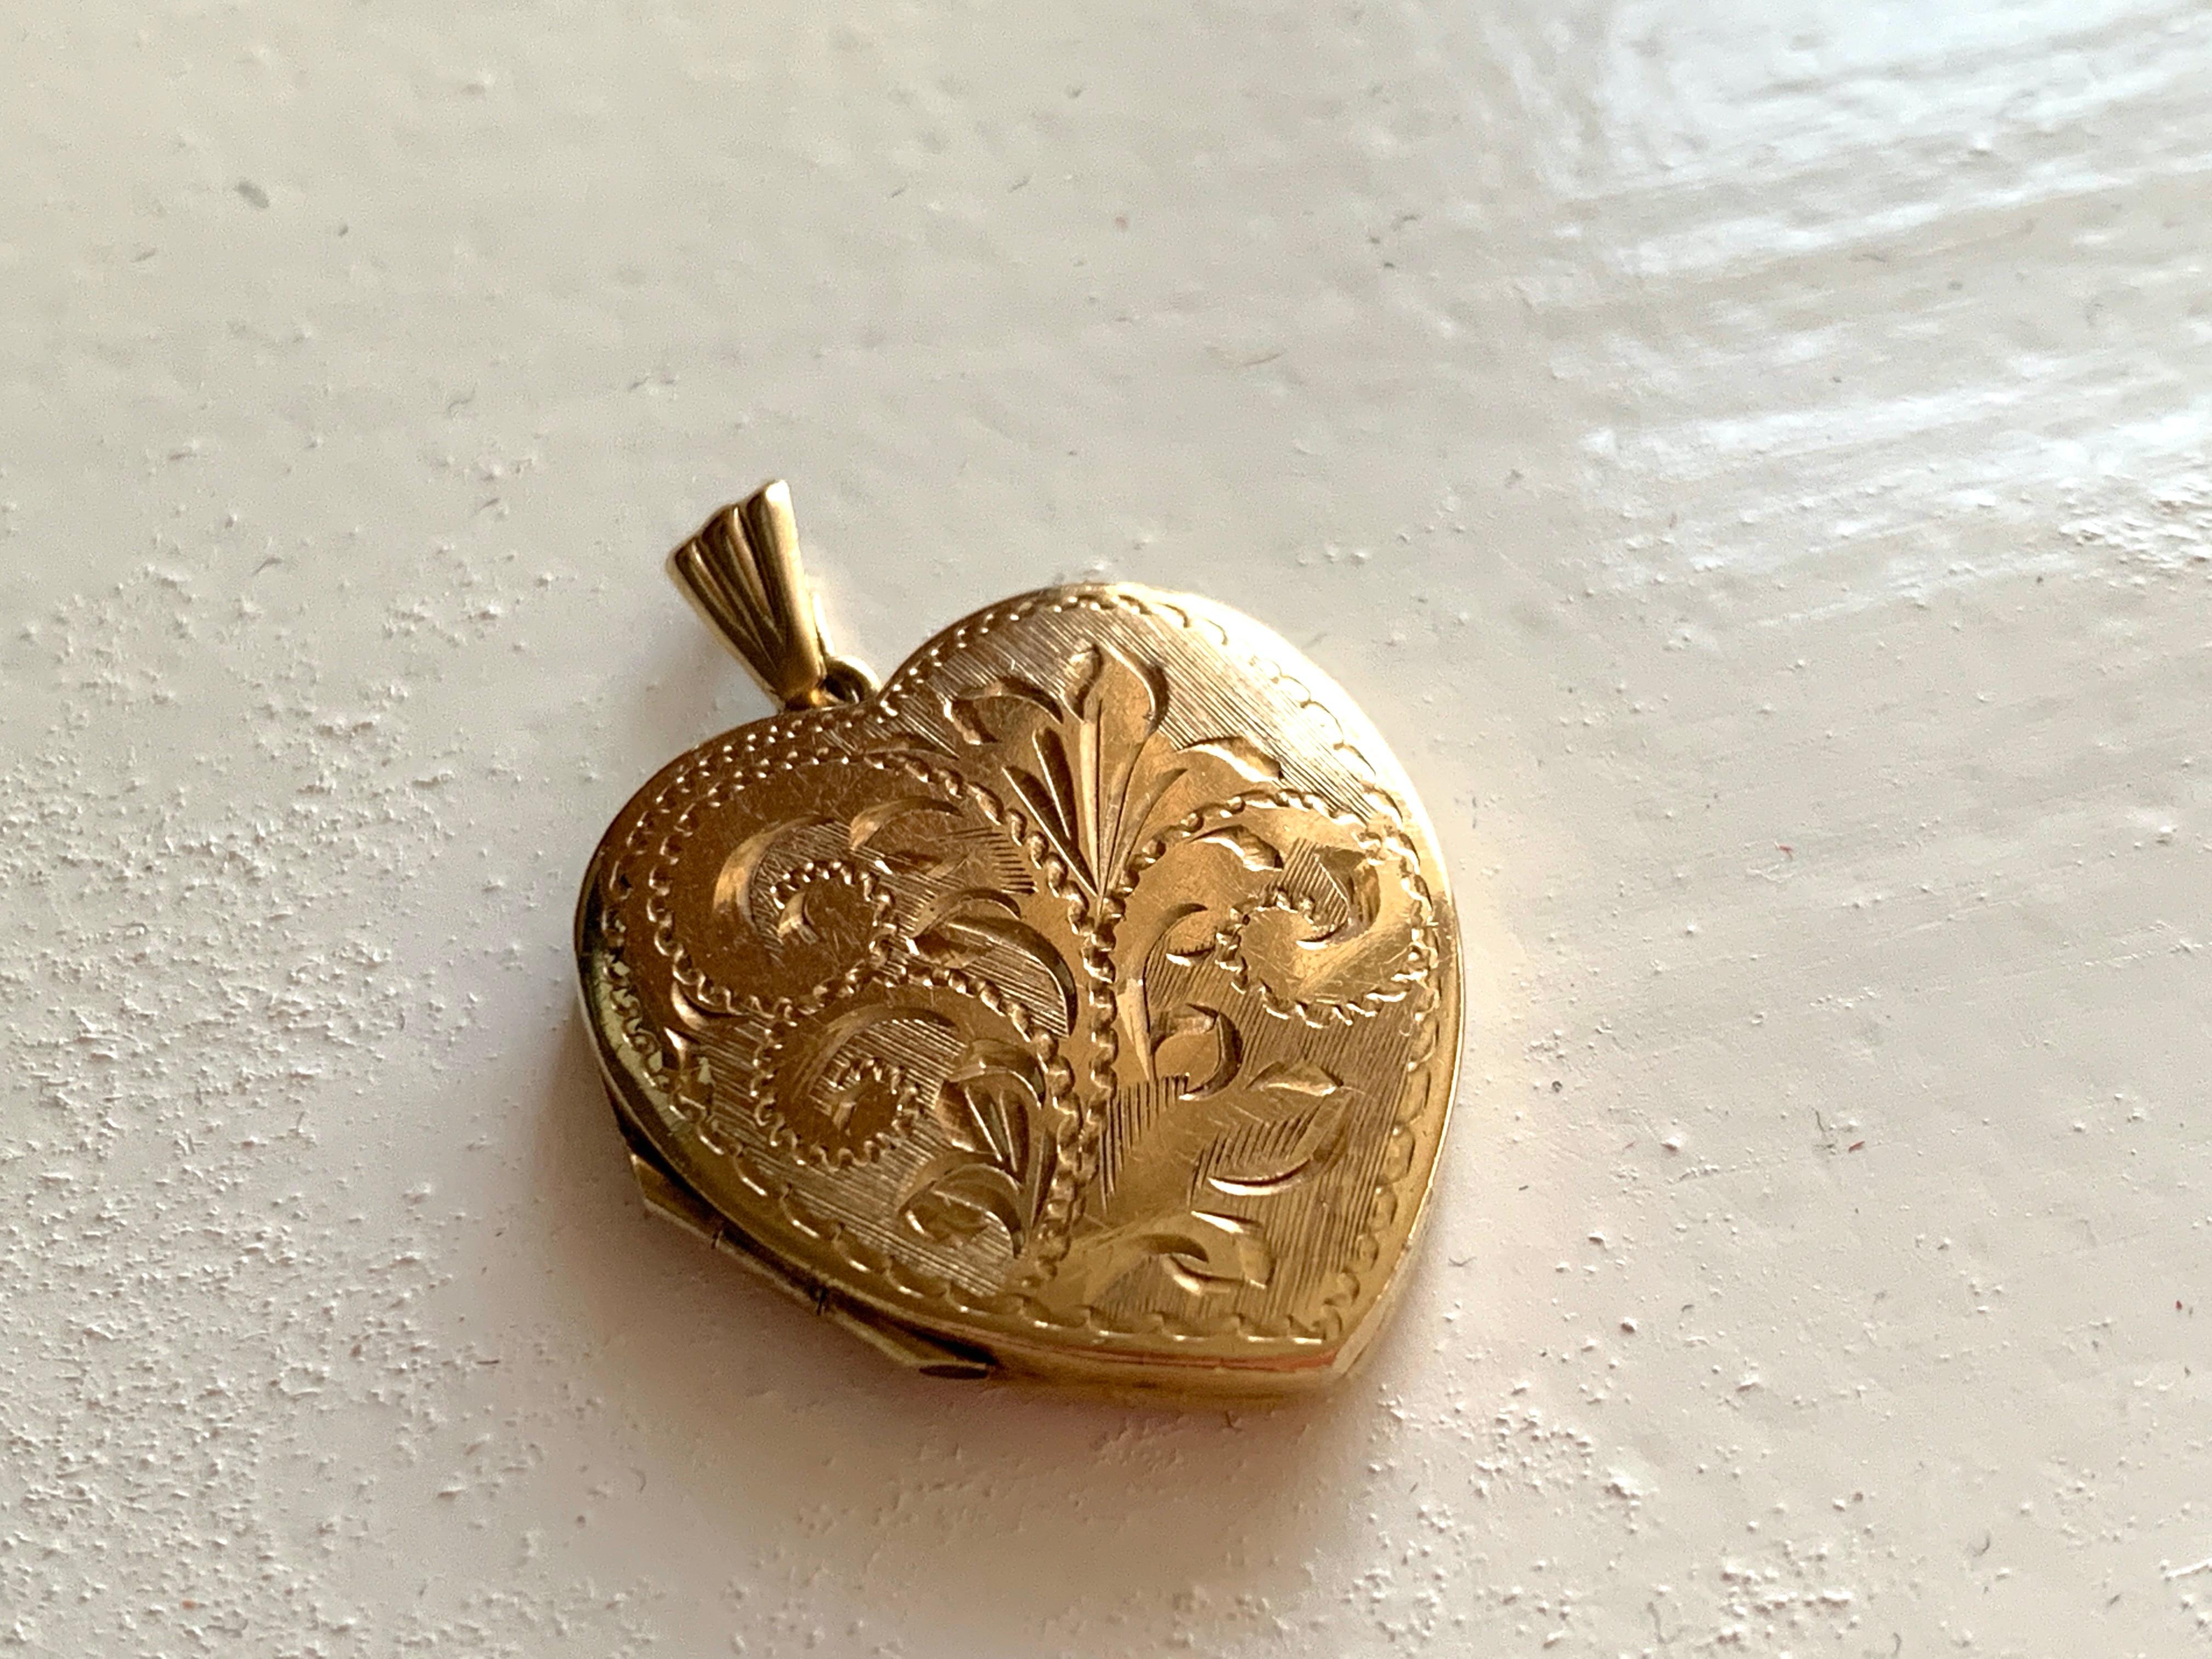 9ct Gold Heart Locket
Beautiful Heart Locket 
with etched floral pattern
by Fred Manshaw Ltd 1974
without glass inside - the image covers are very light plastic

Fully Hallmarked.

